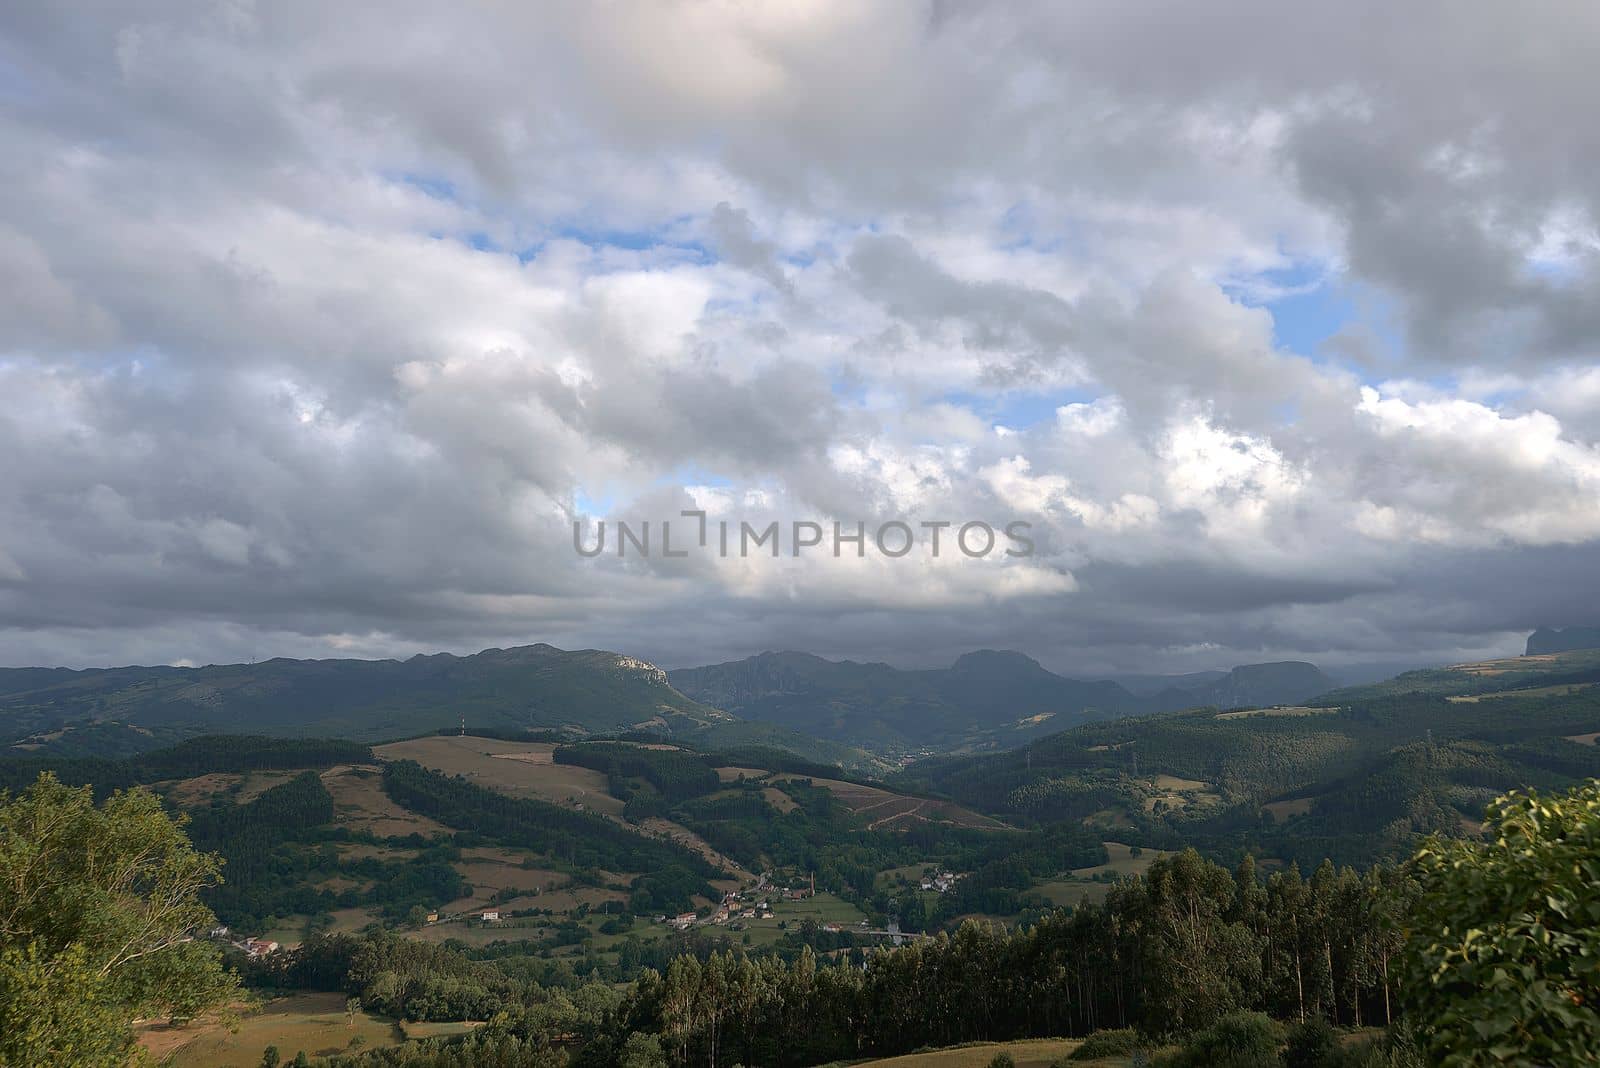 Rustic mountain landscape with cloudy sky.Bien Aparecida, Cantabria, meadows, trees and pastures for animals, rustic houses, sky with storm clouds.